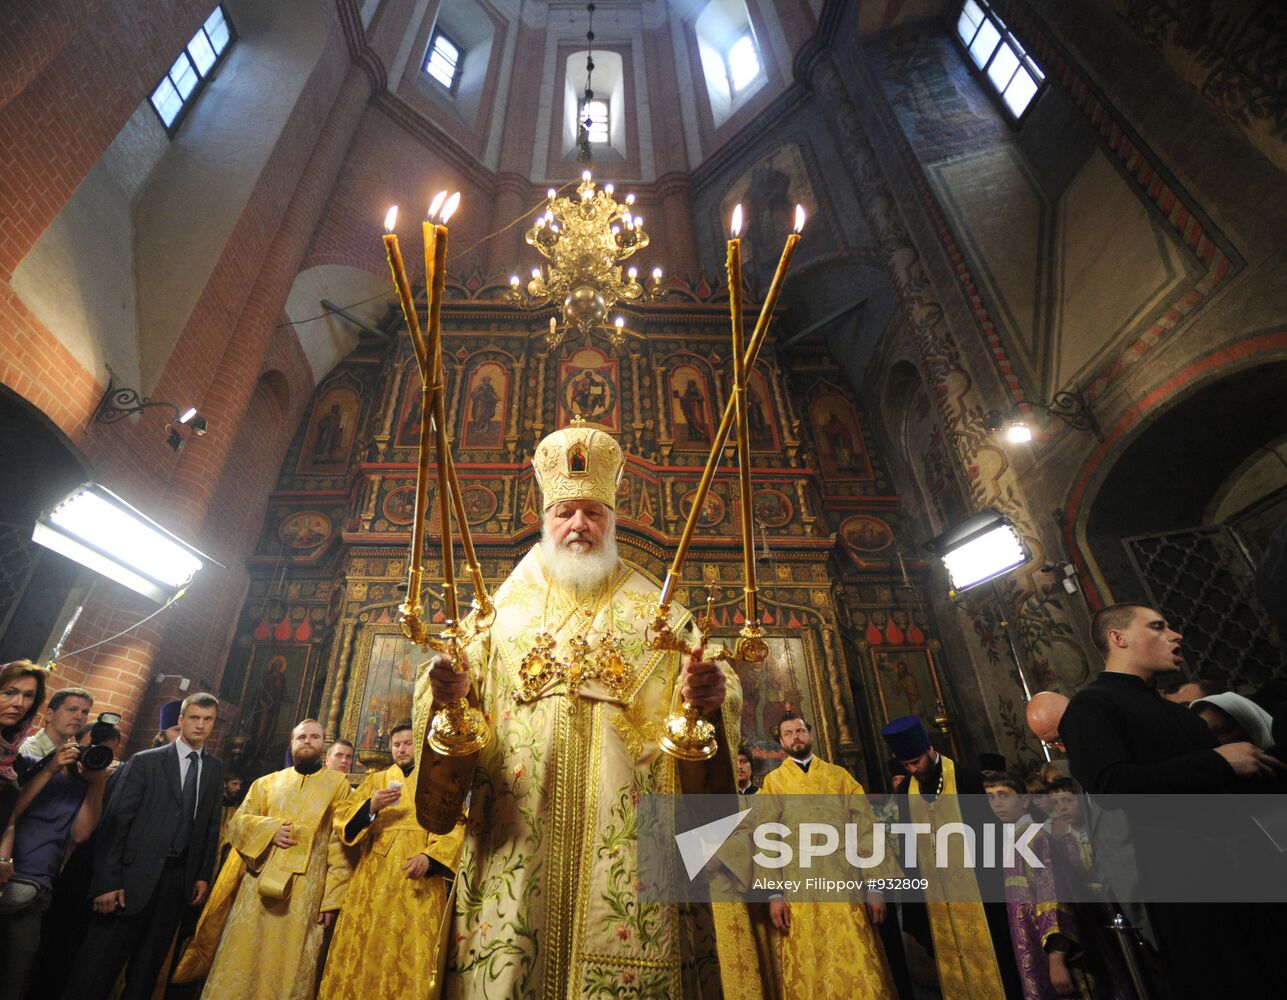 Ceremonial service marks St. Basil's Cathedral's 450th birthday